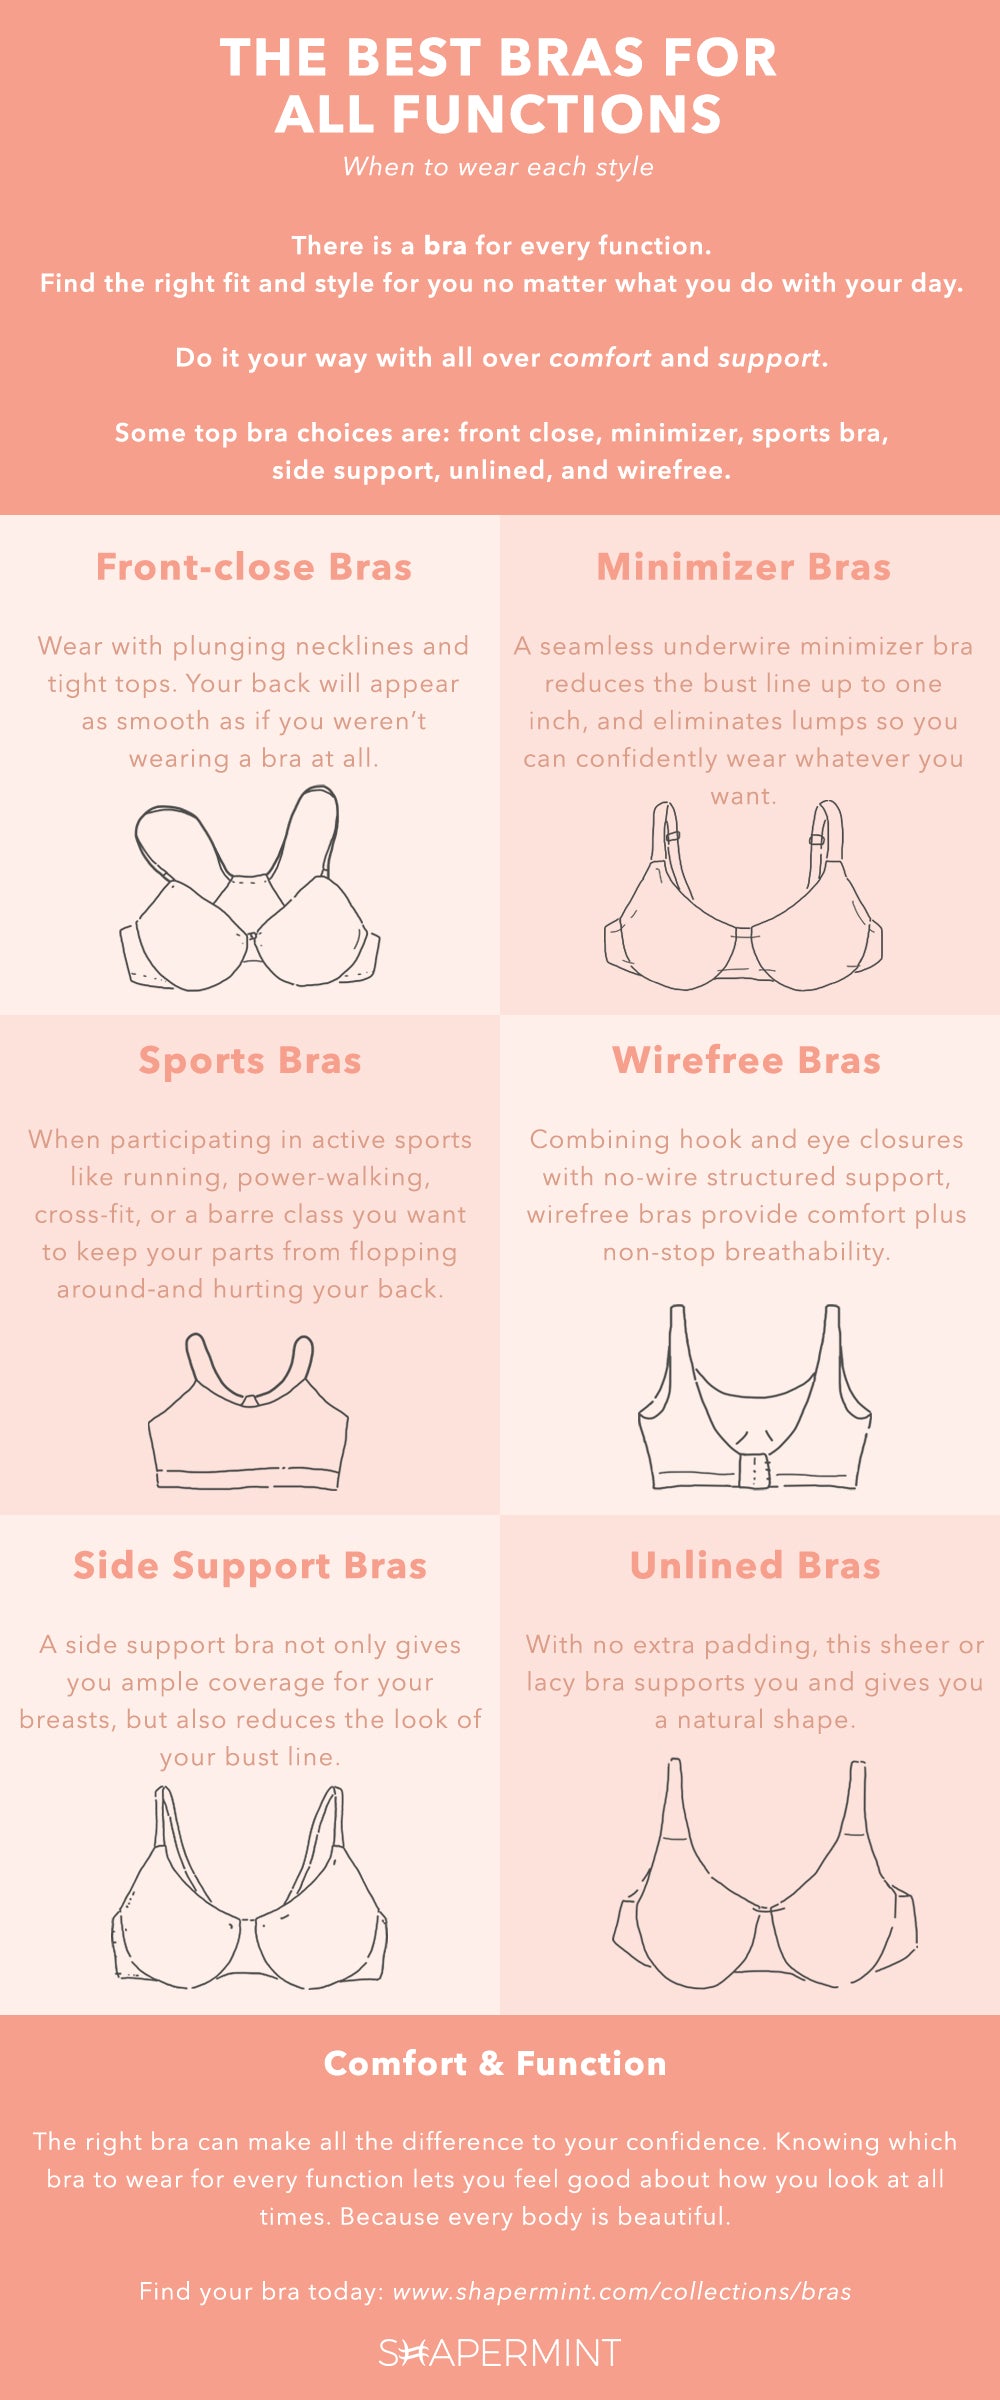 6 Best Bra Types for All Functions